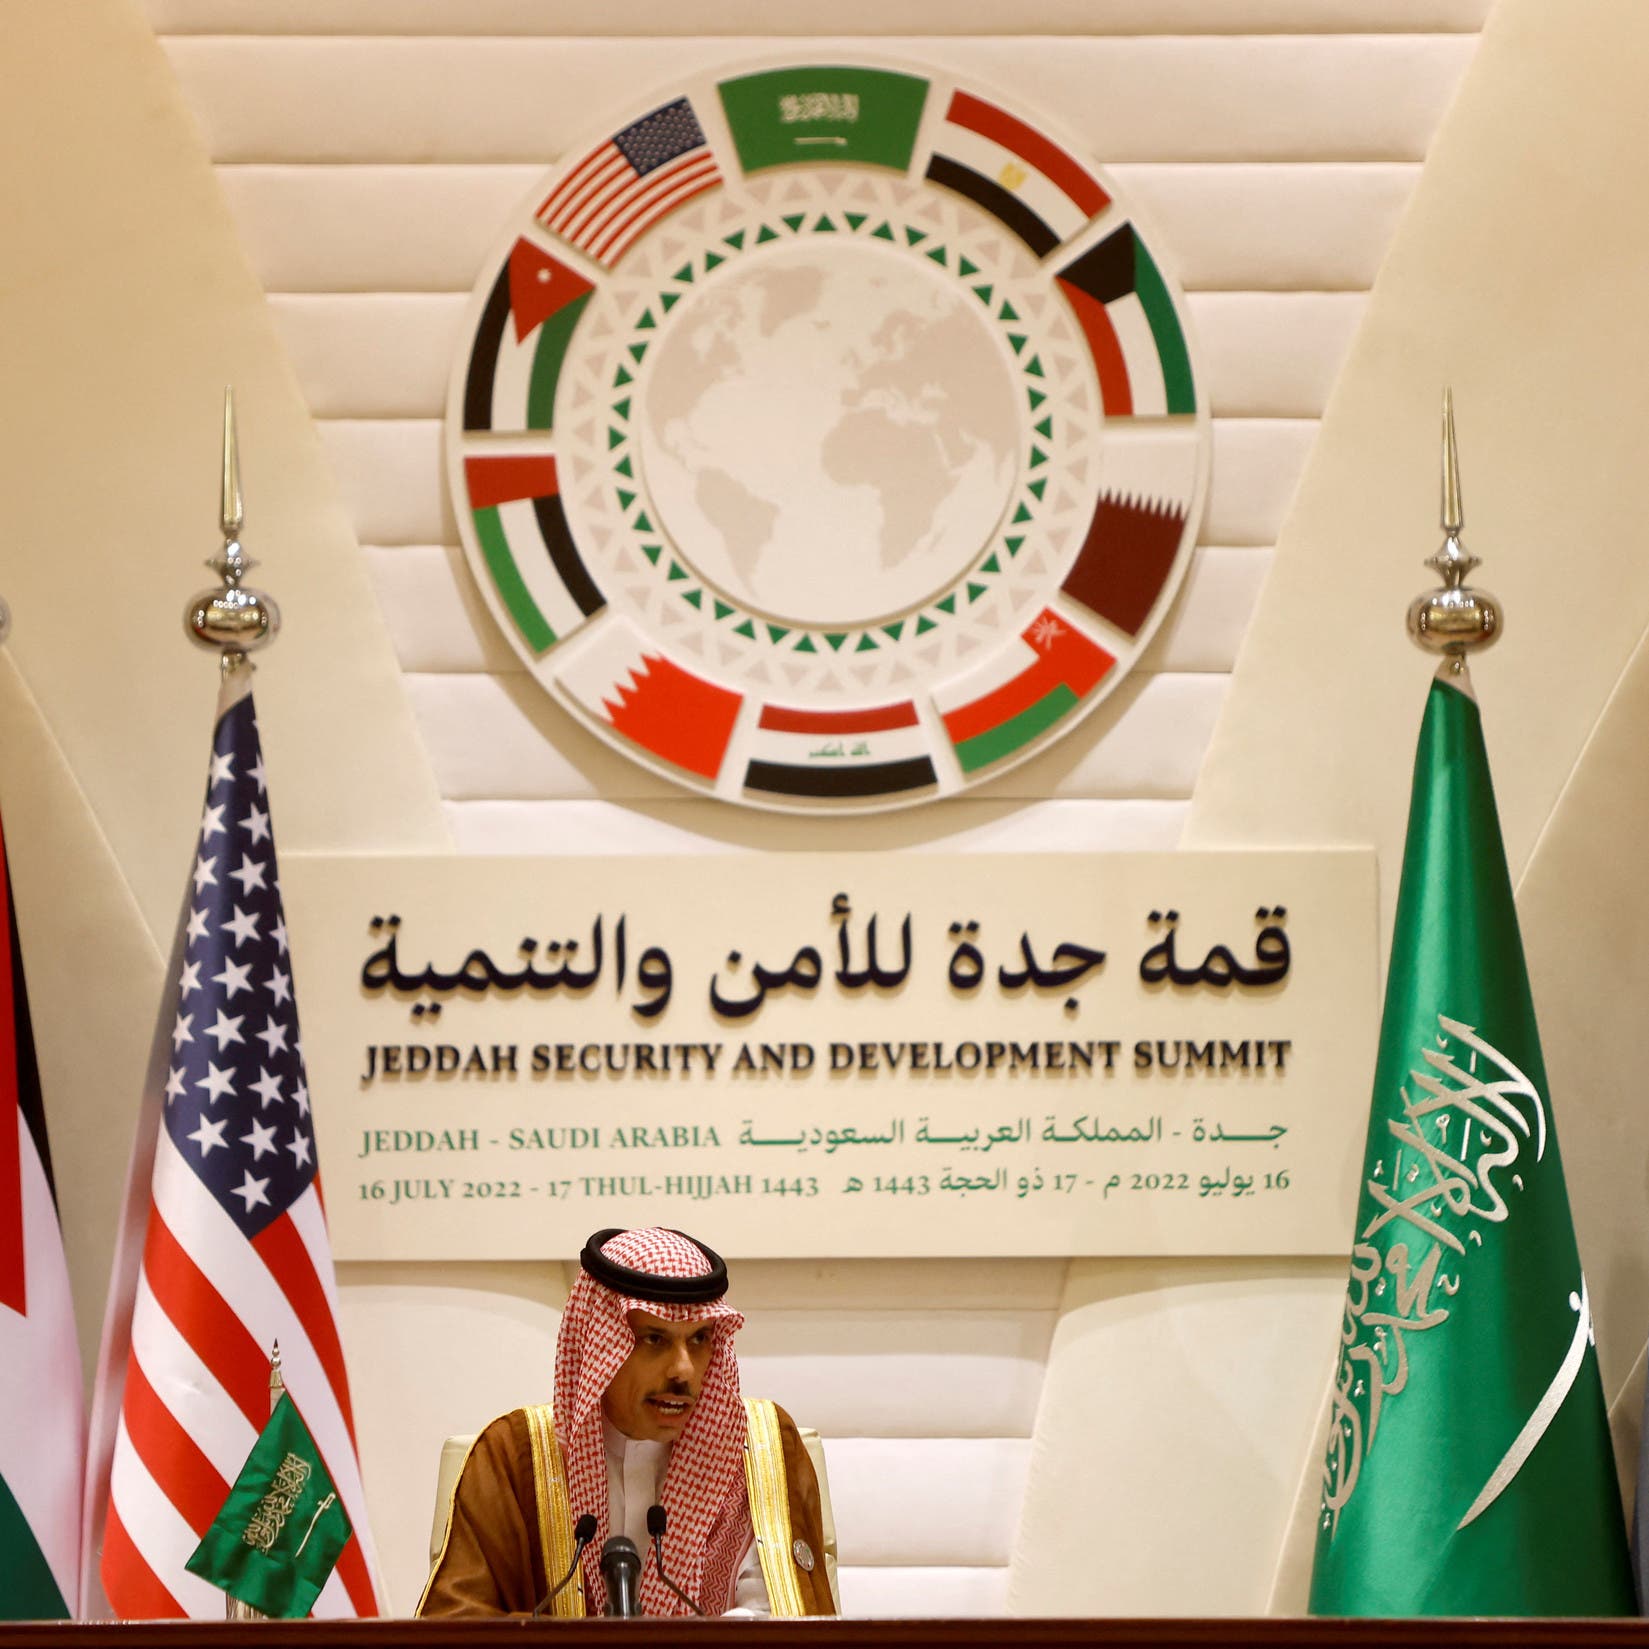 Saudi FM Prince Faisal holds press conference at end of Jeddah summit